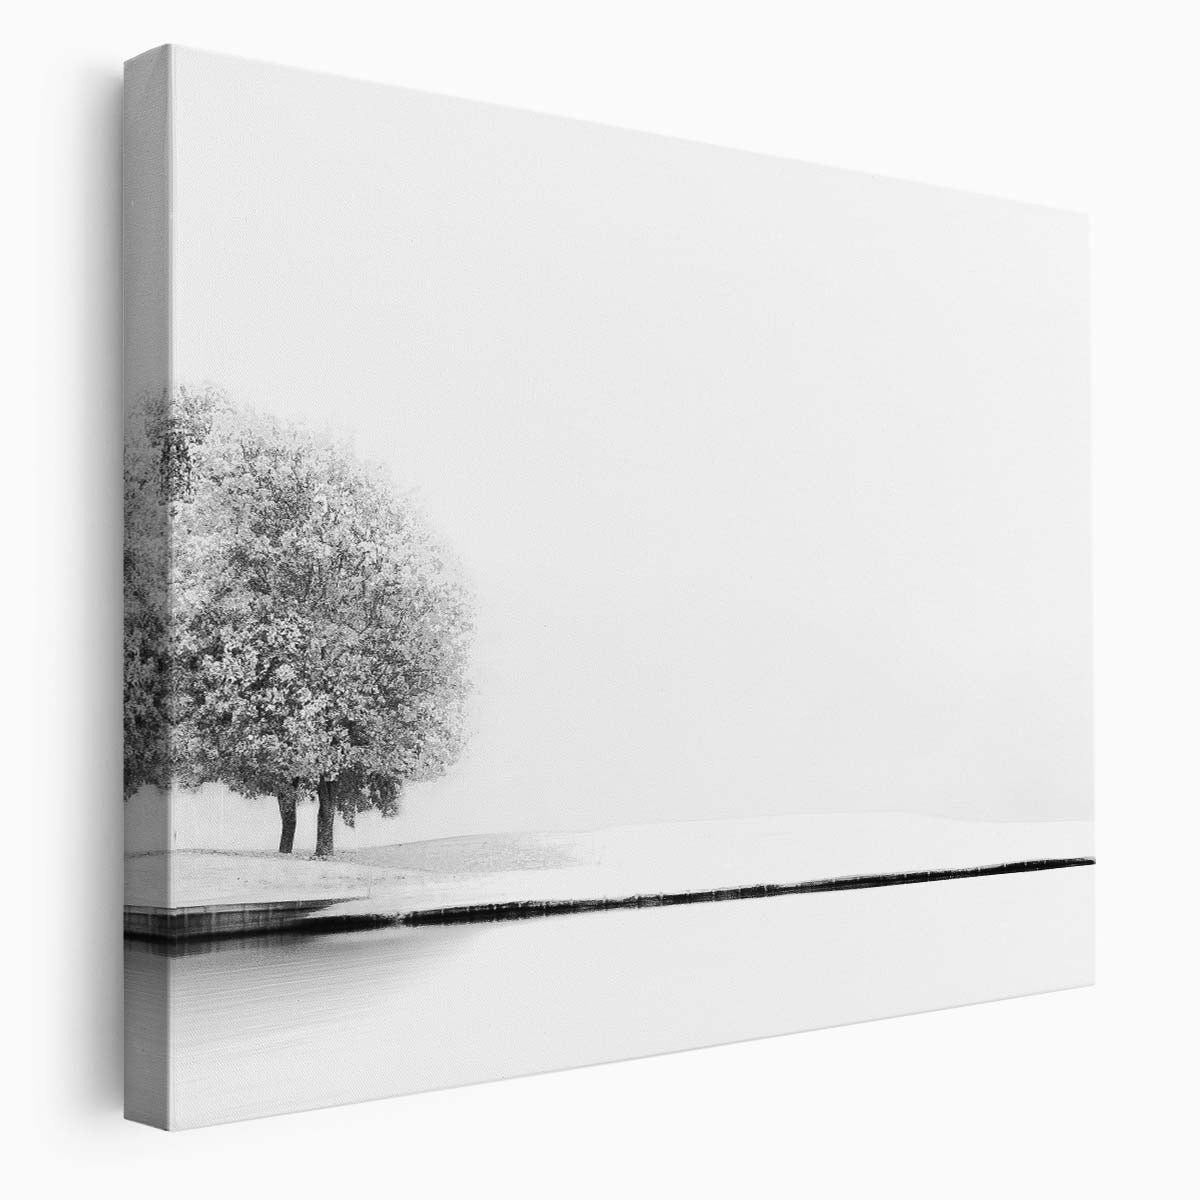 Minimalist Winter Snowscape Monochrome Lake Wall Art by Luxuriance Designs. Made in USA.